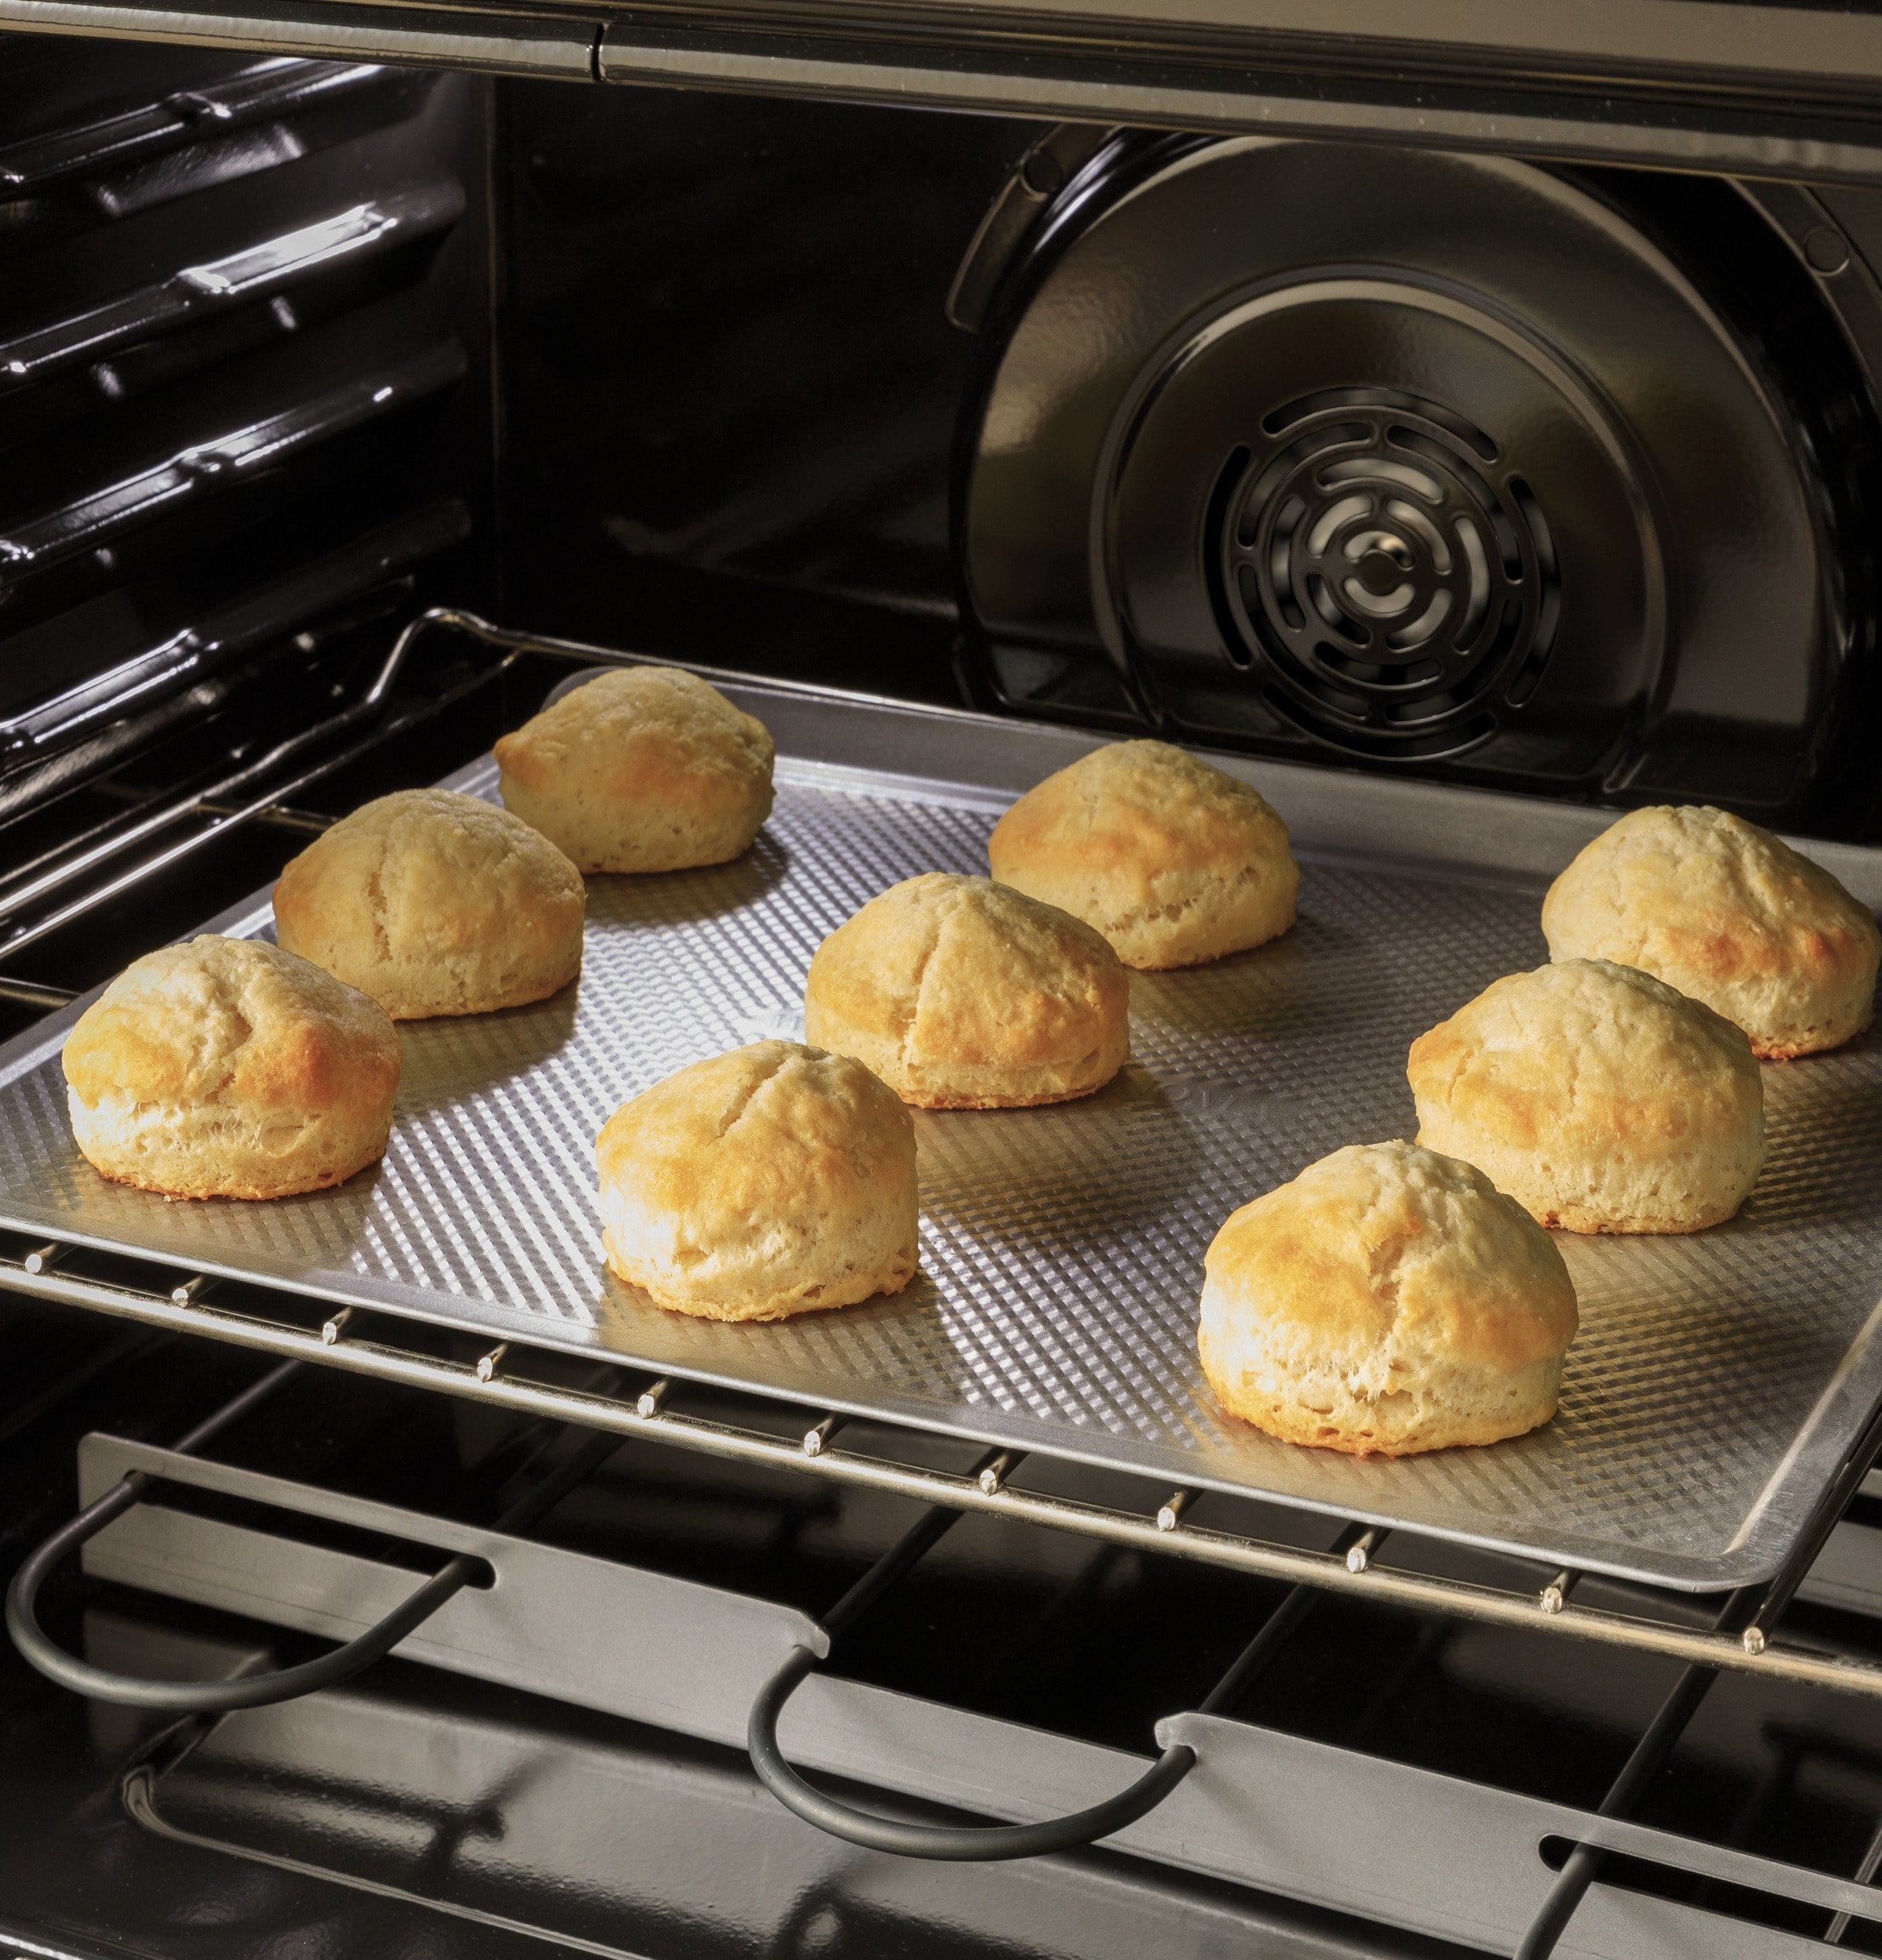 GE 30 Gas Steam/Self Clean Range with Air Fry, Convection, Griddle in  Slate - JGB735EPESC